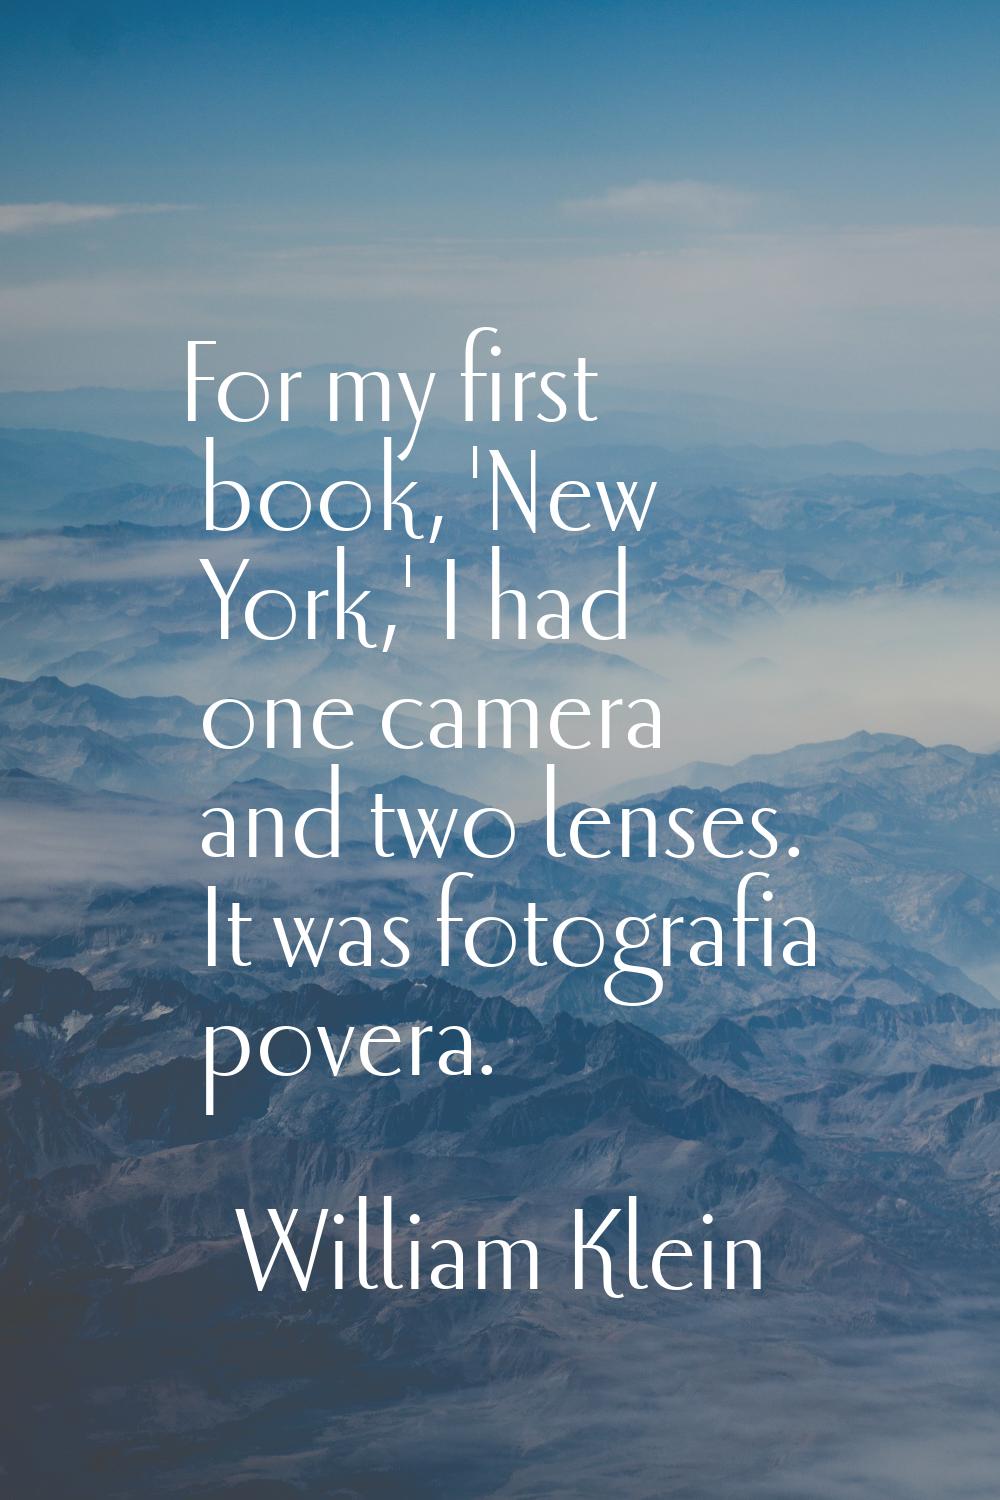 For my first book, 'New York,' I had one camera and two lenses. It was fotografia povera.